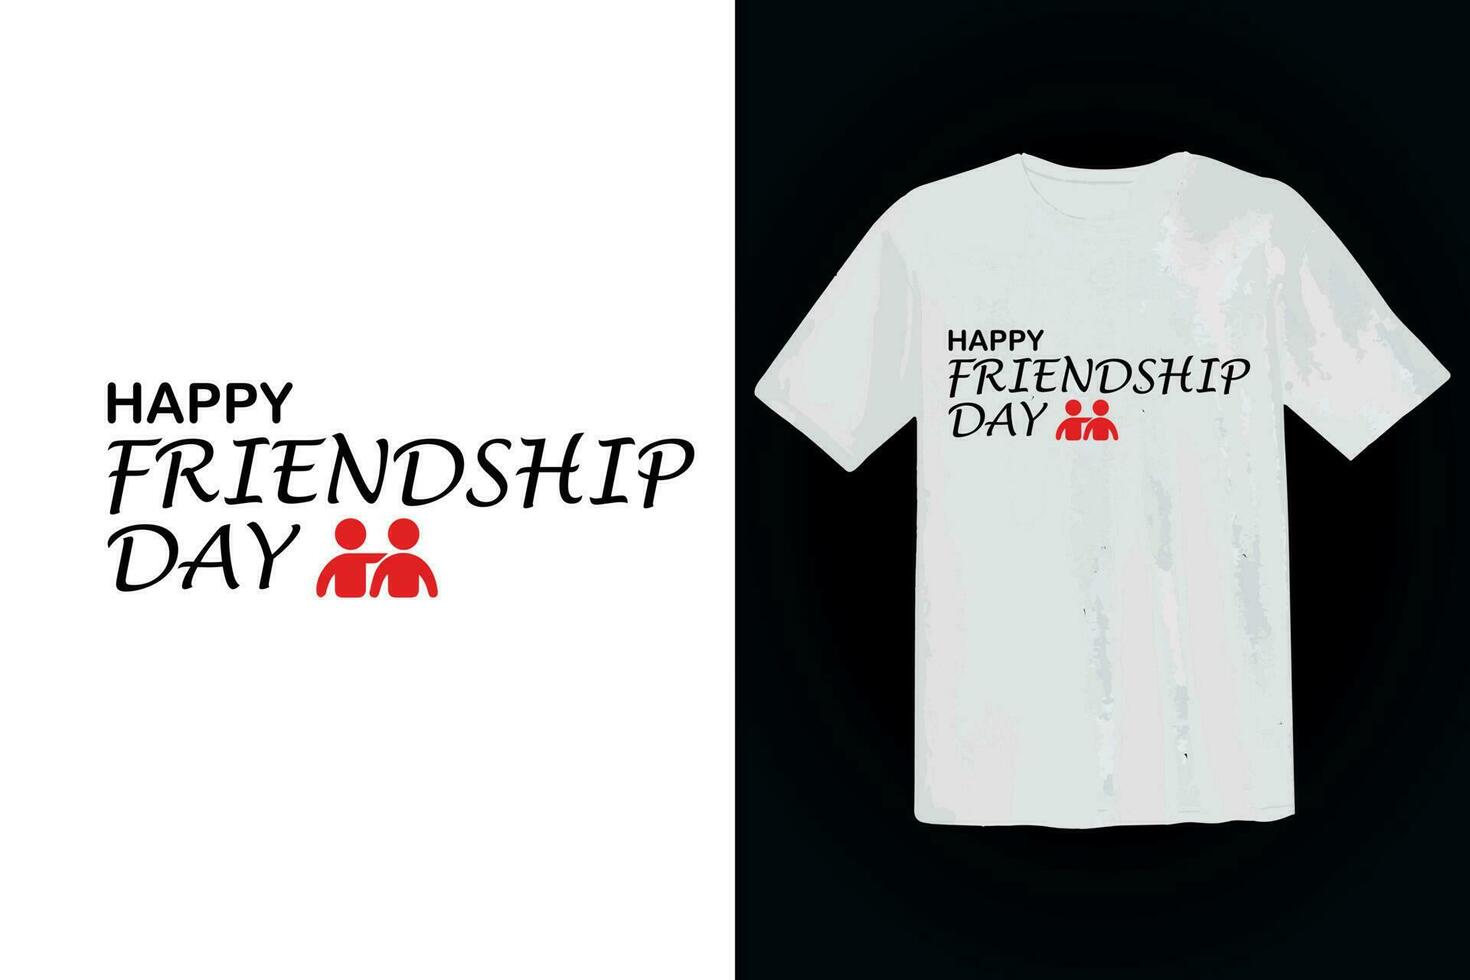 typography t shirt design for friendship day. friendship day wear design. trendy unique stylish ready to print apparel design vector